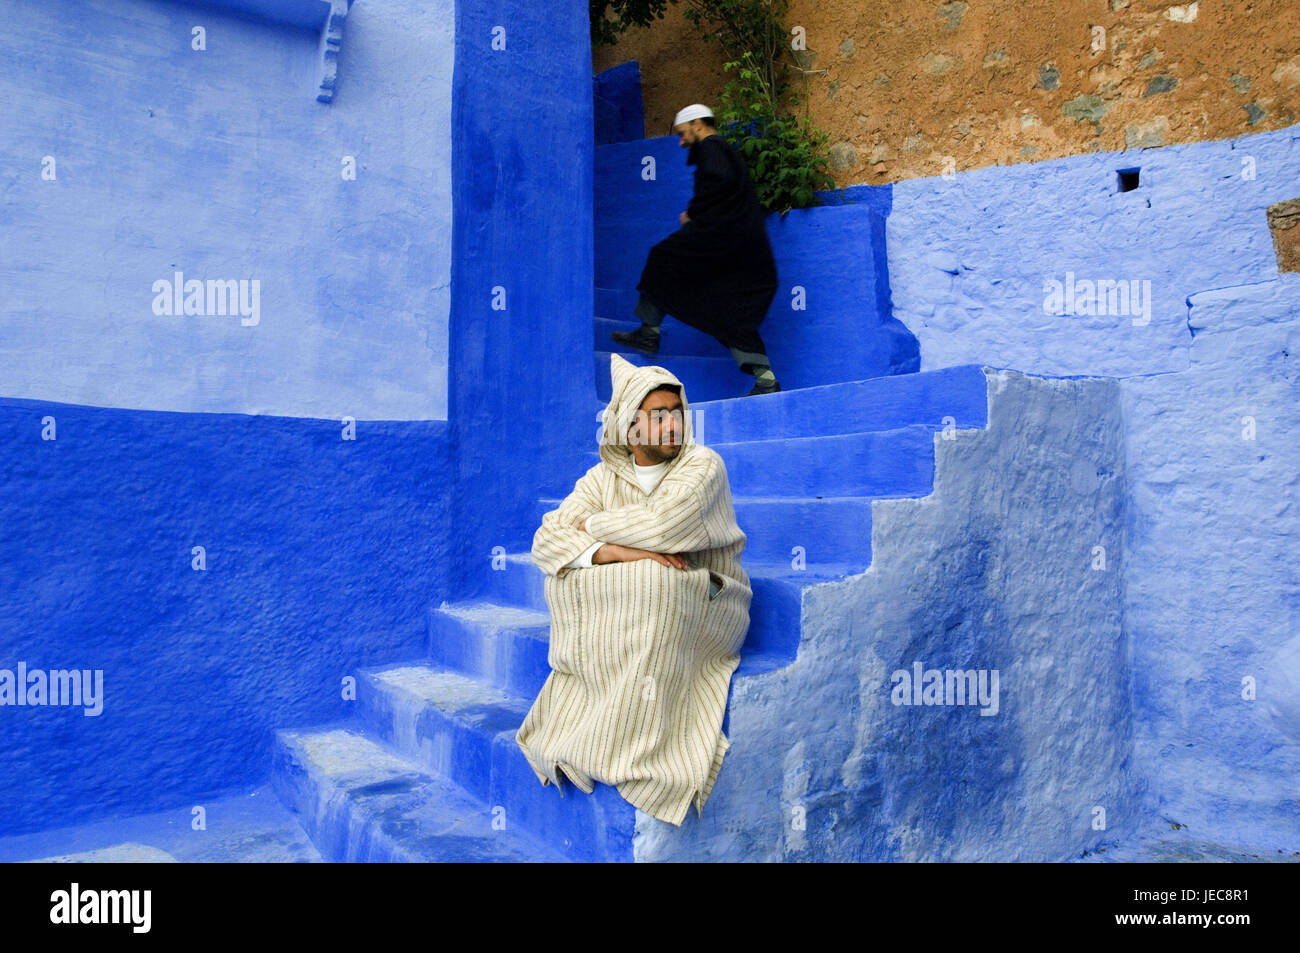 Morocco, Chefchaouen, lane, stairs, blue, men, sit, go, no model release, Africa, house, building, house defensive wall, defensive wall, architectural style, architecture, colour tuning, place of interest, person, locals, casing, hood, copy square, Djellaba, Stock Photo